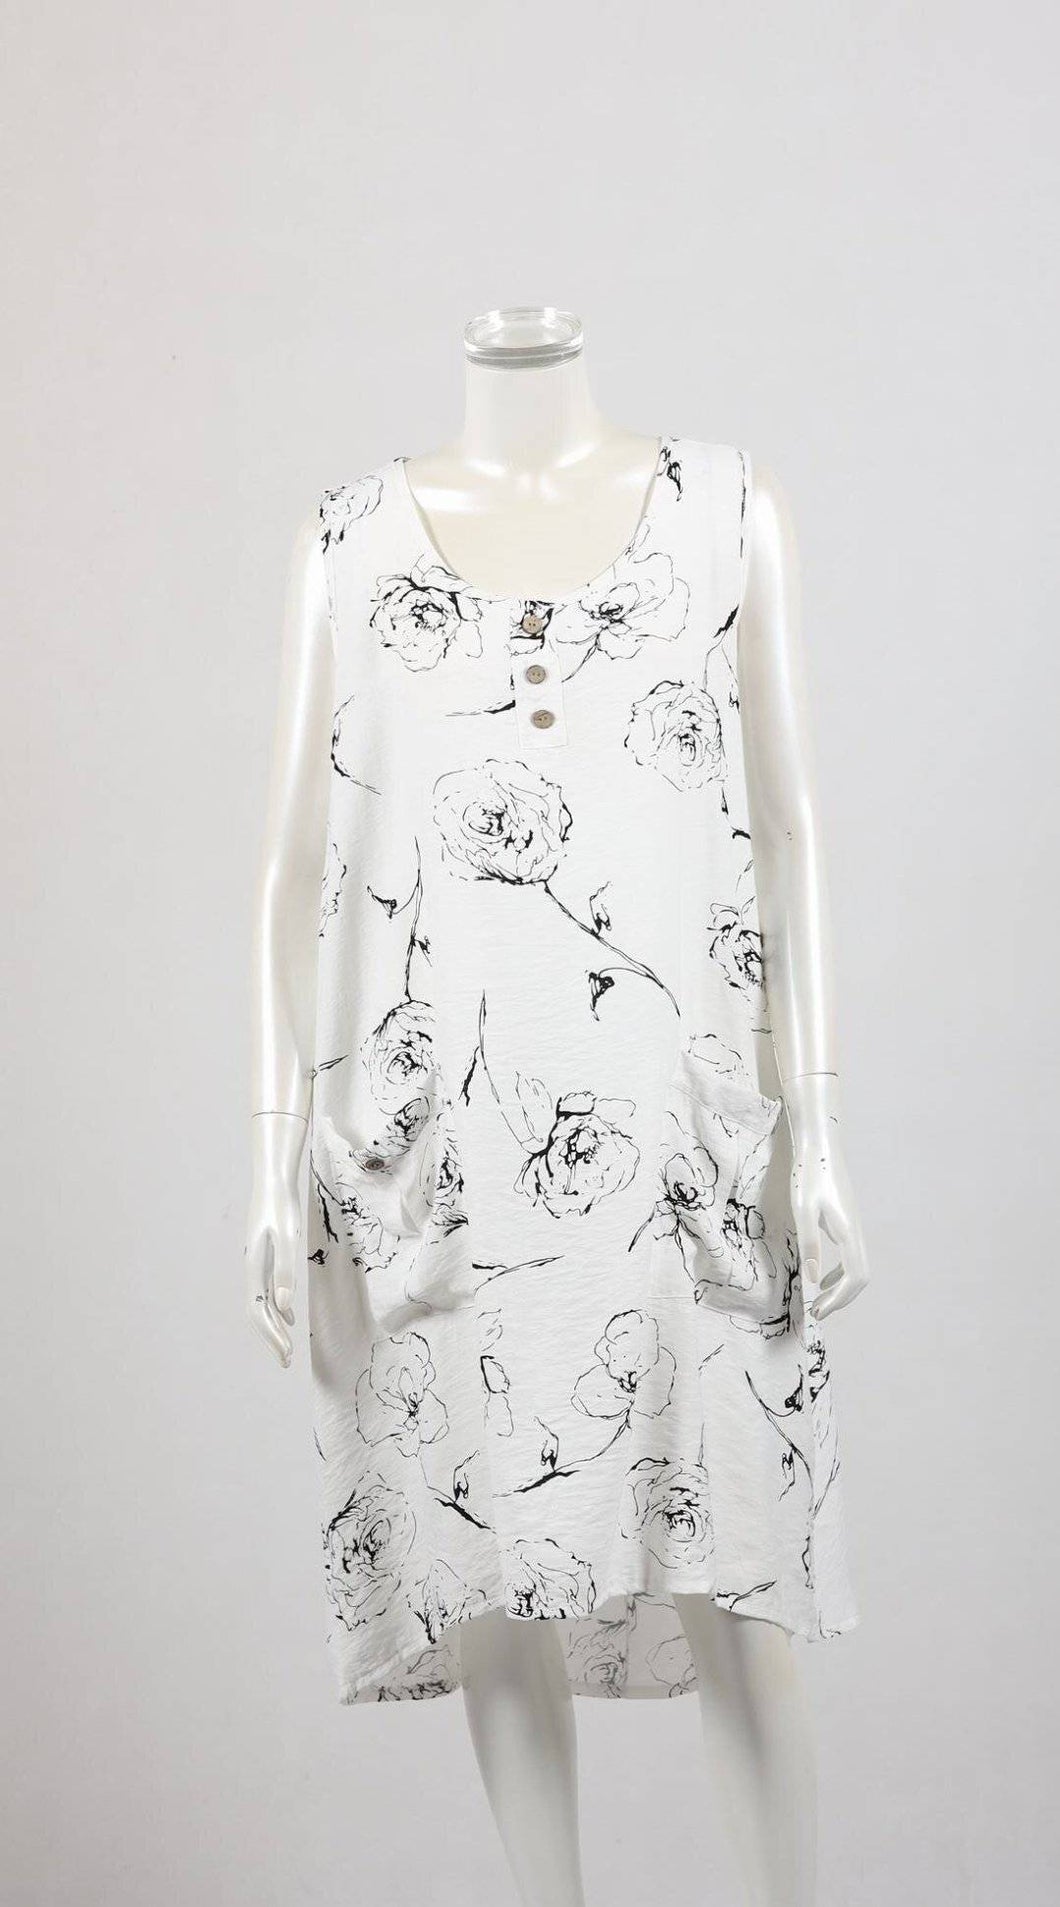 Tunic Maxi Dress White Sleeveless With Black Print With Pockets - Tracey Glynn Fashions